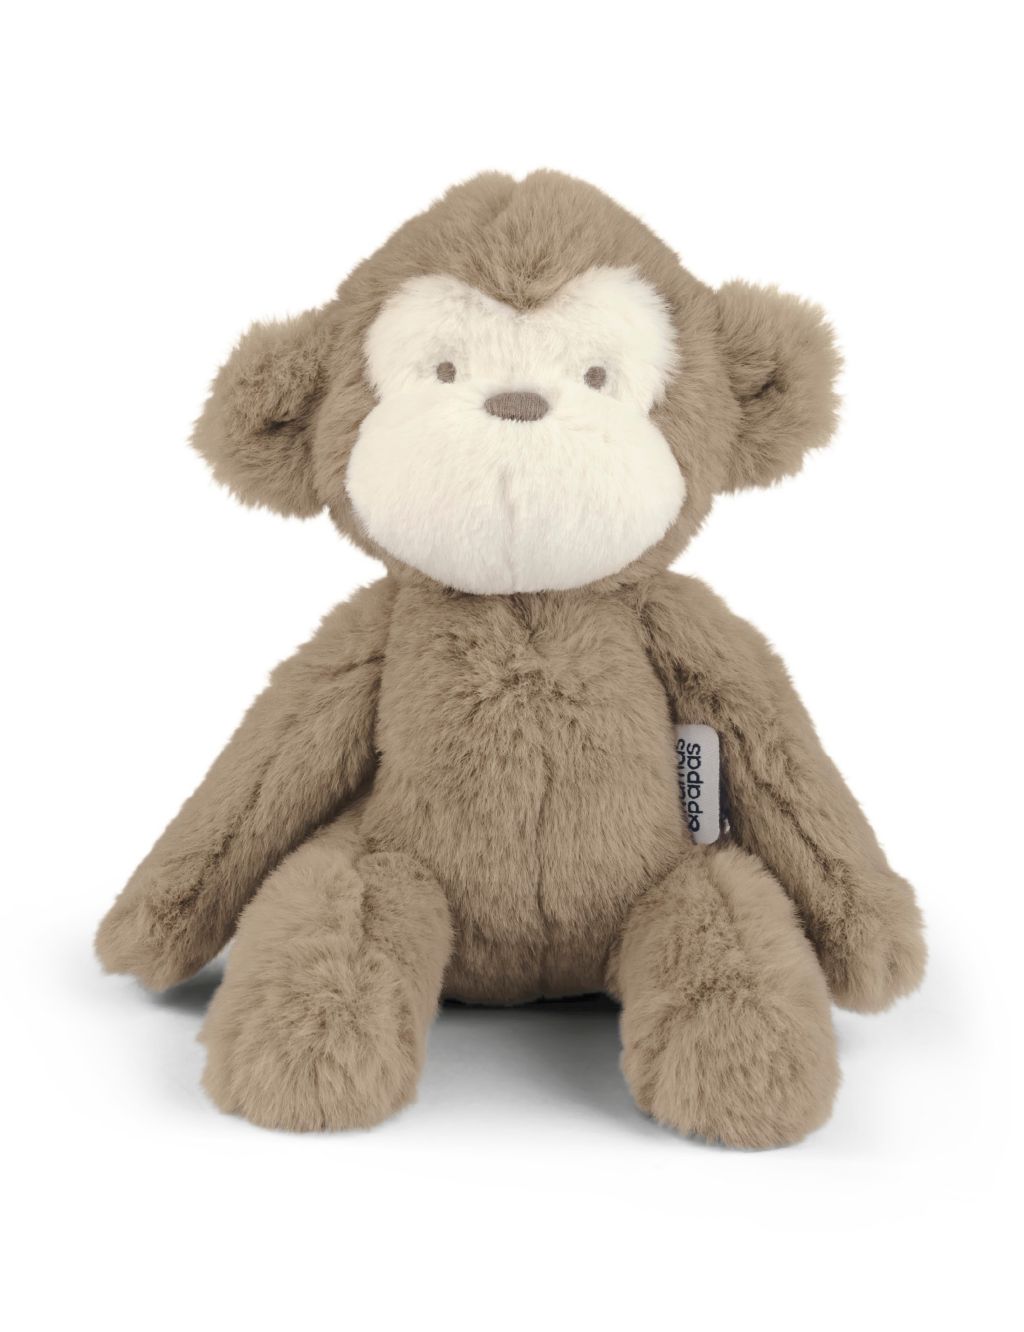 Welcome to the World Small Monkey Soft Toy